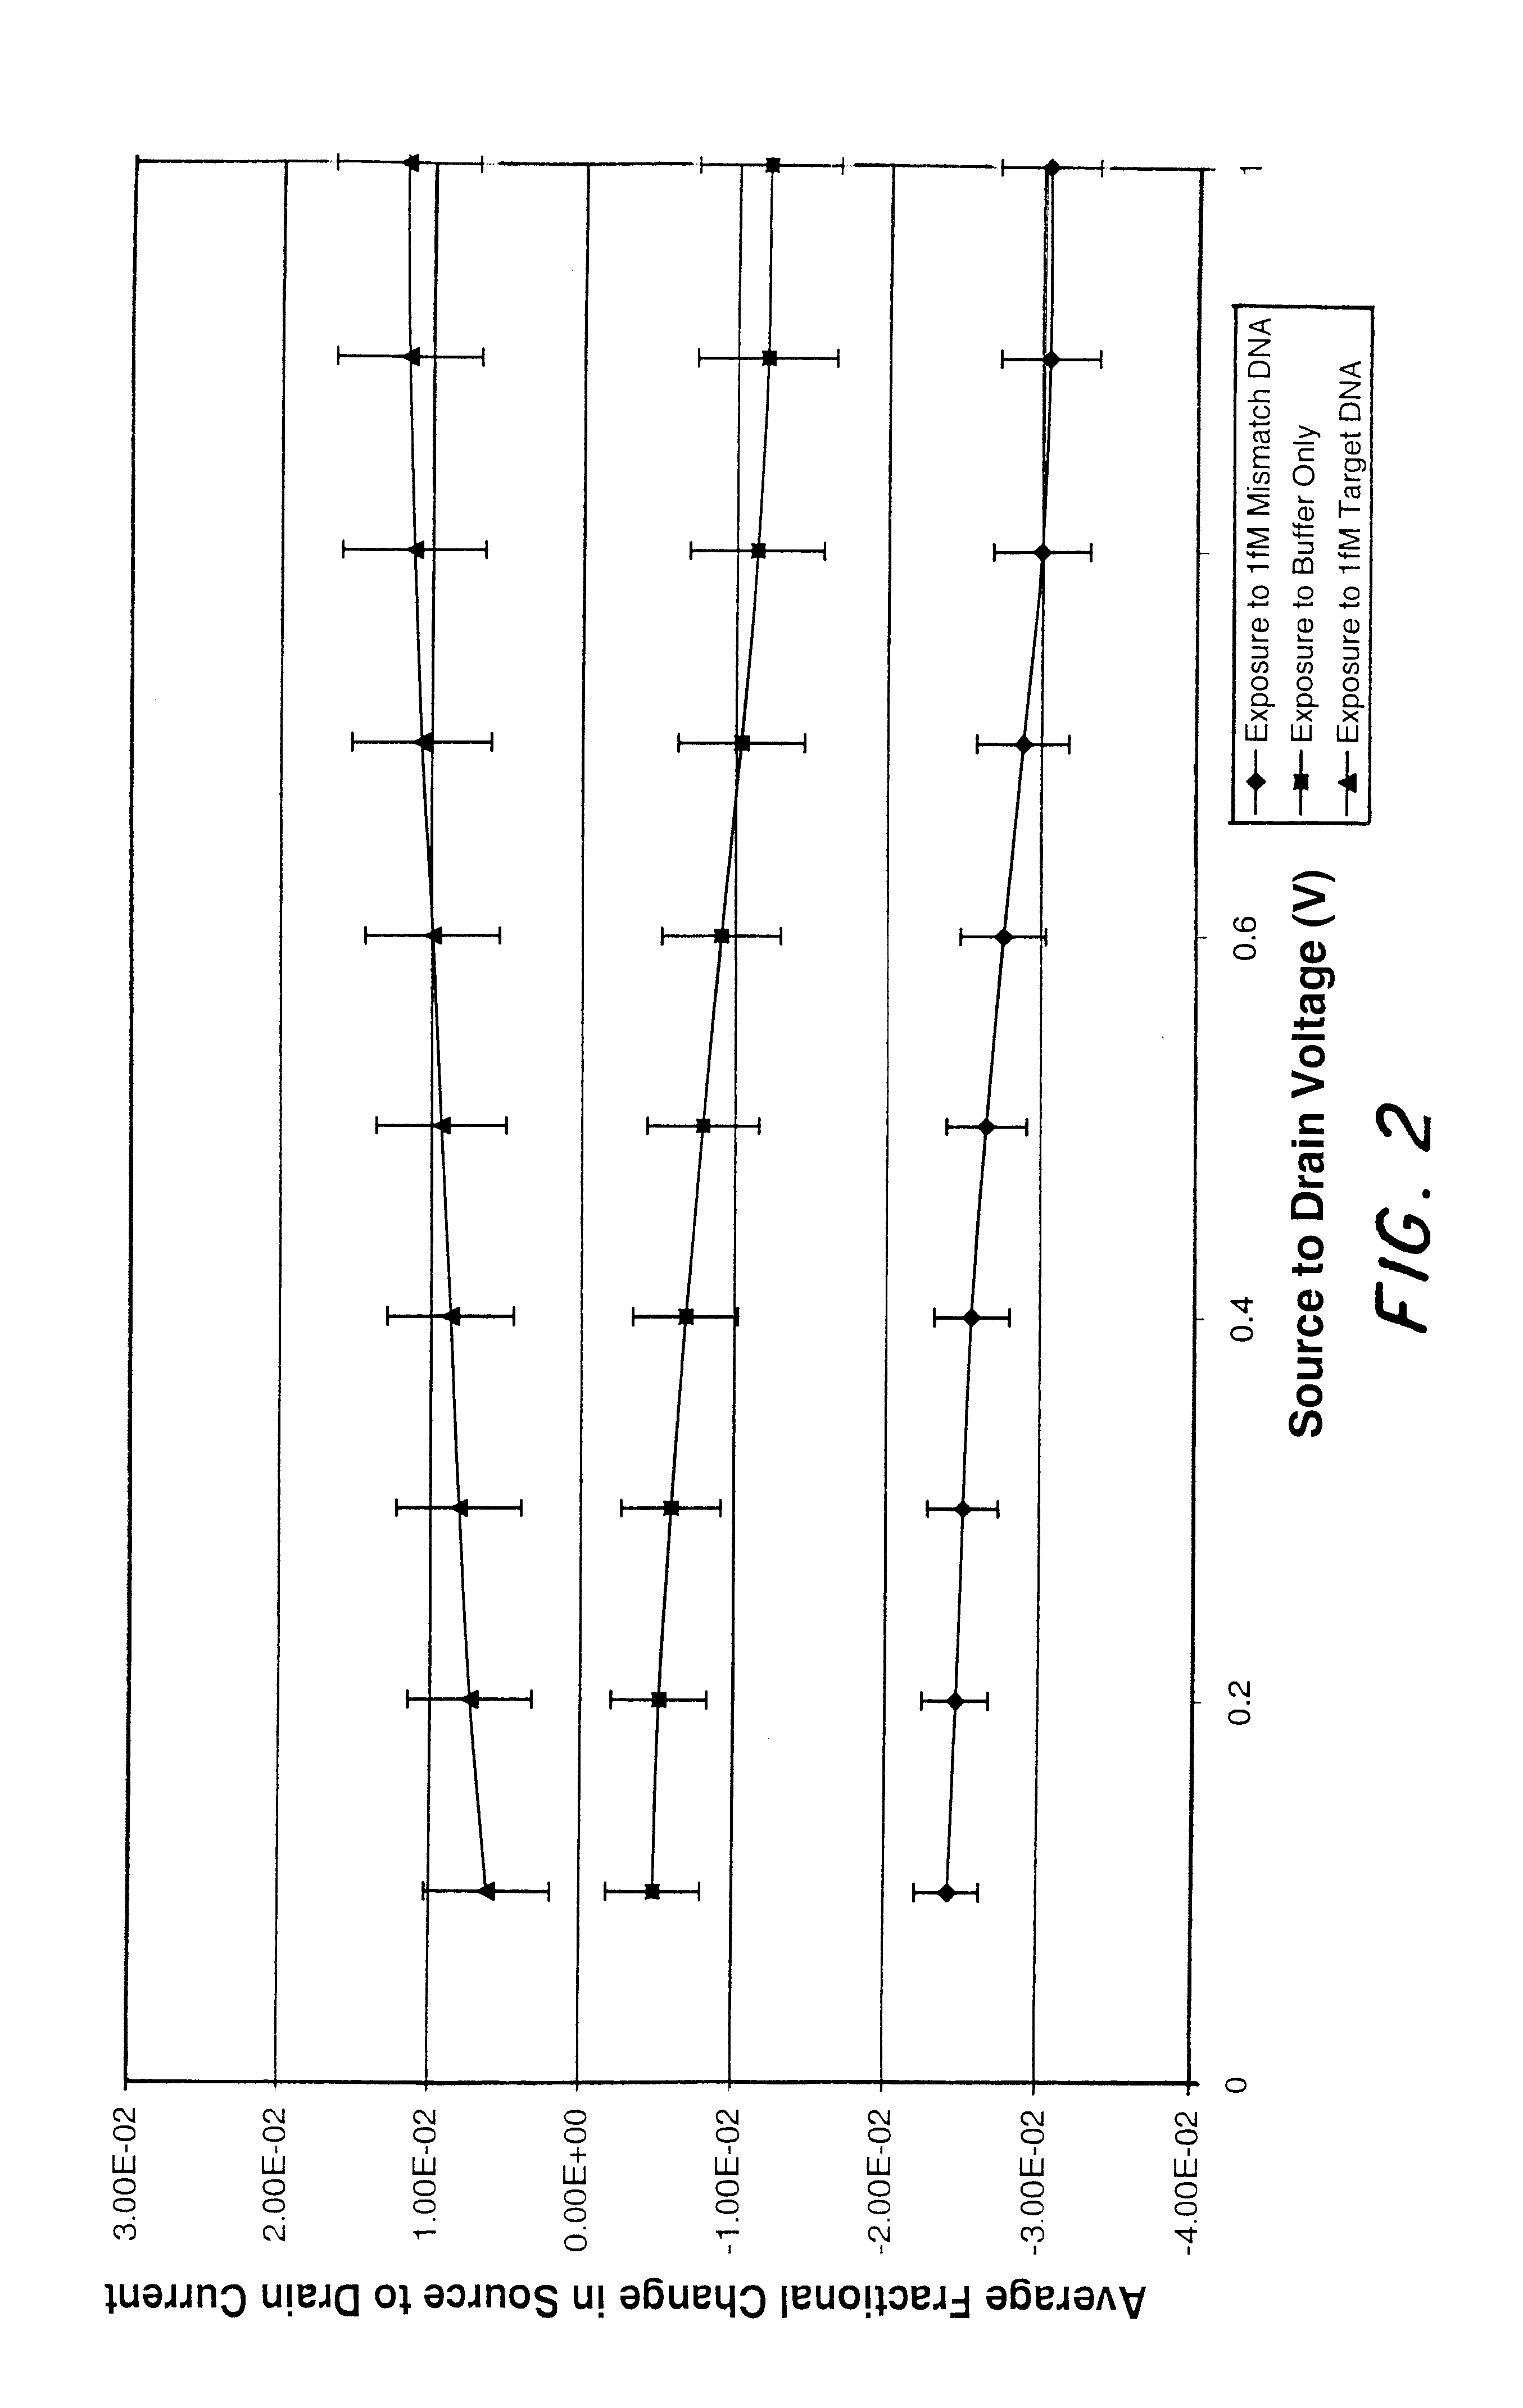 Microelectronic device and method for label-free detection and quantification of biological and chemical molecules